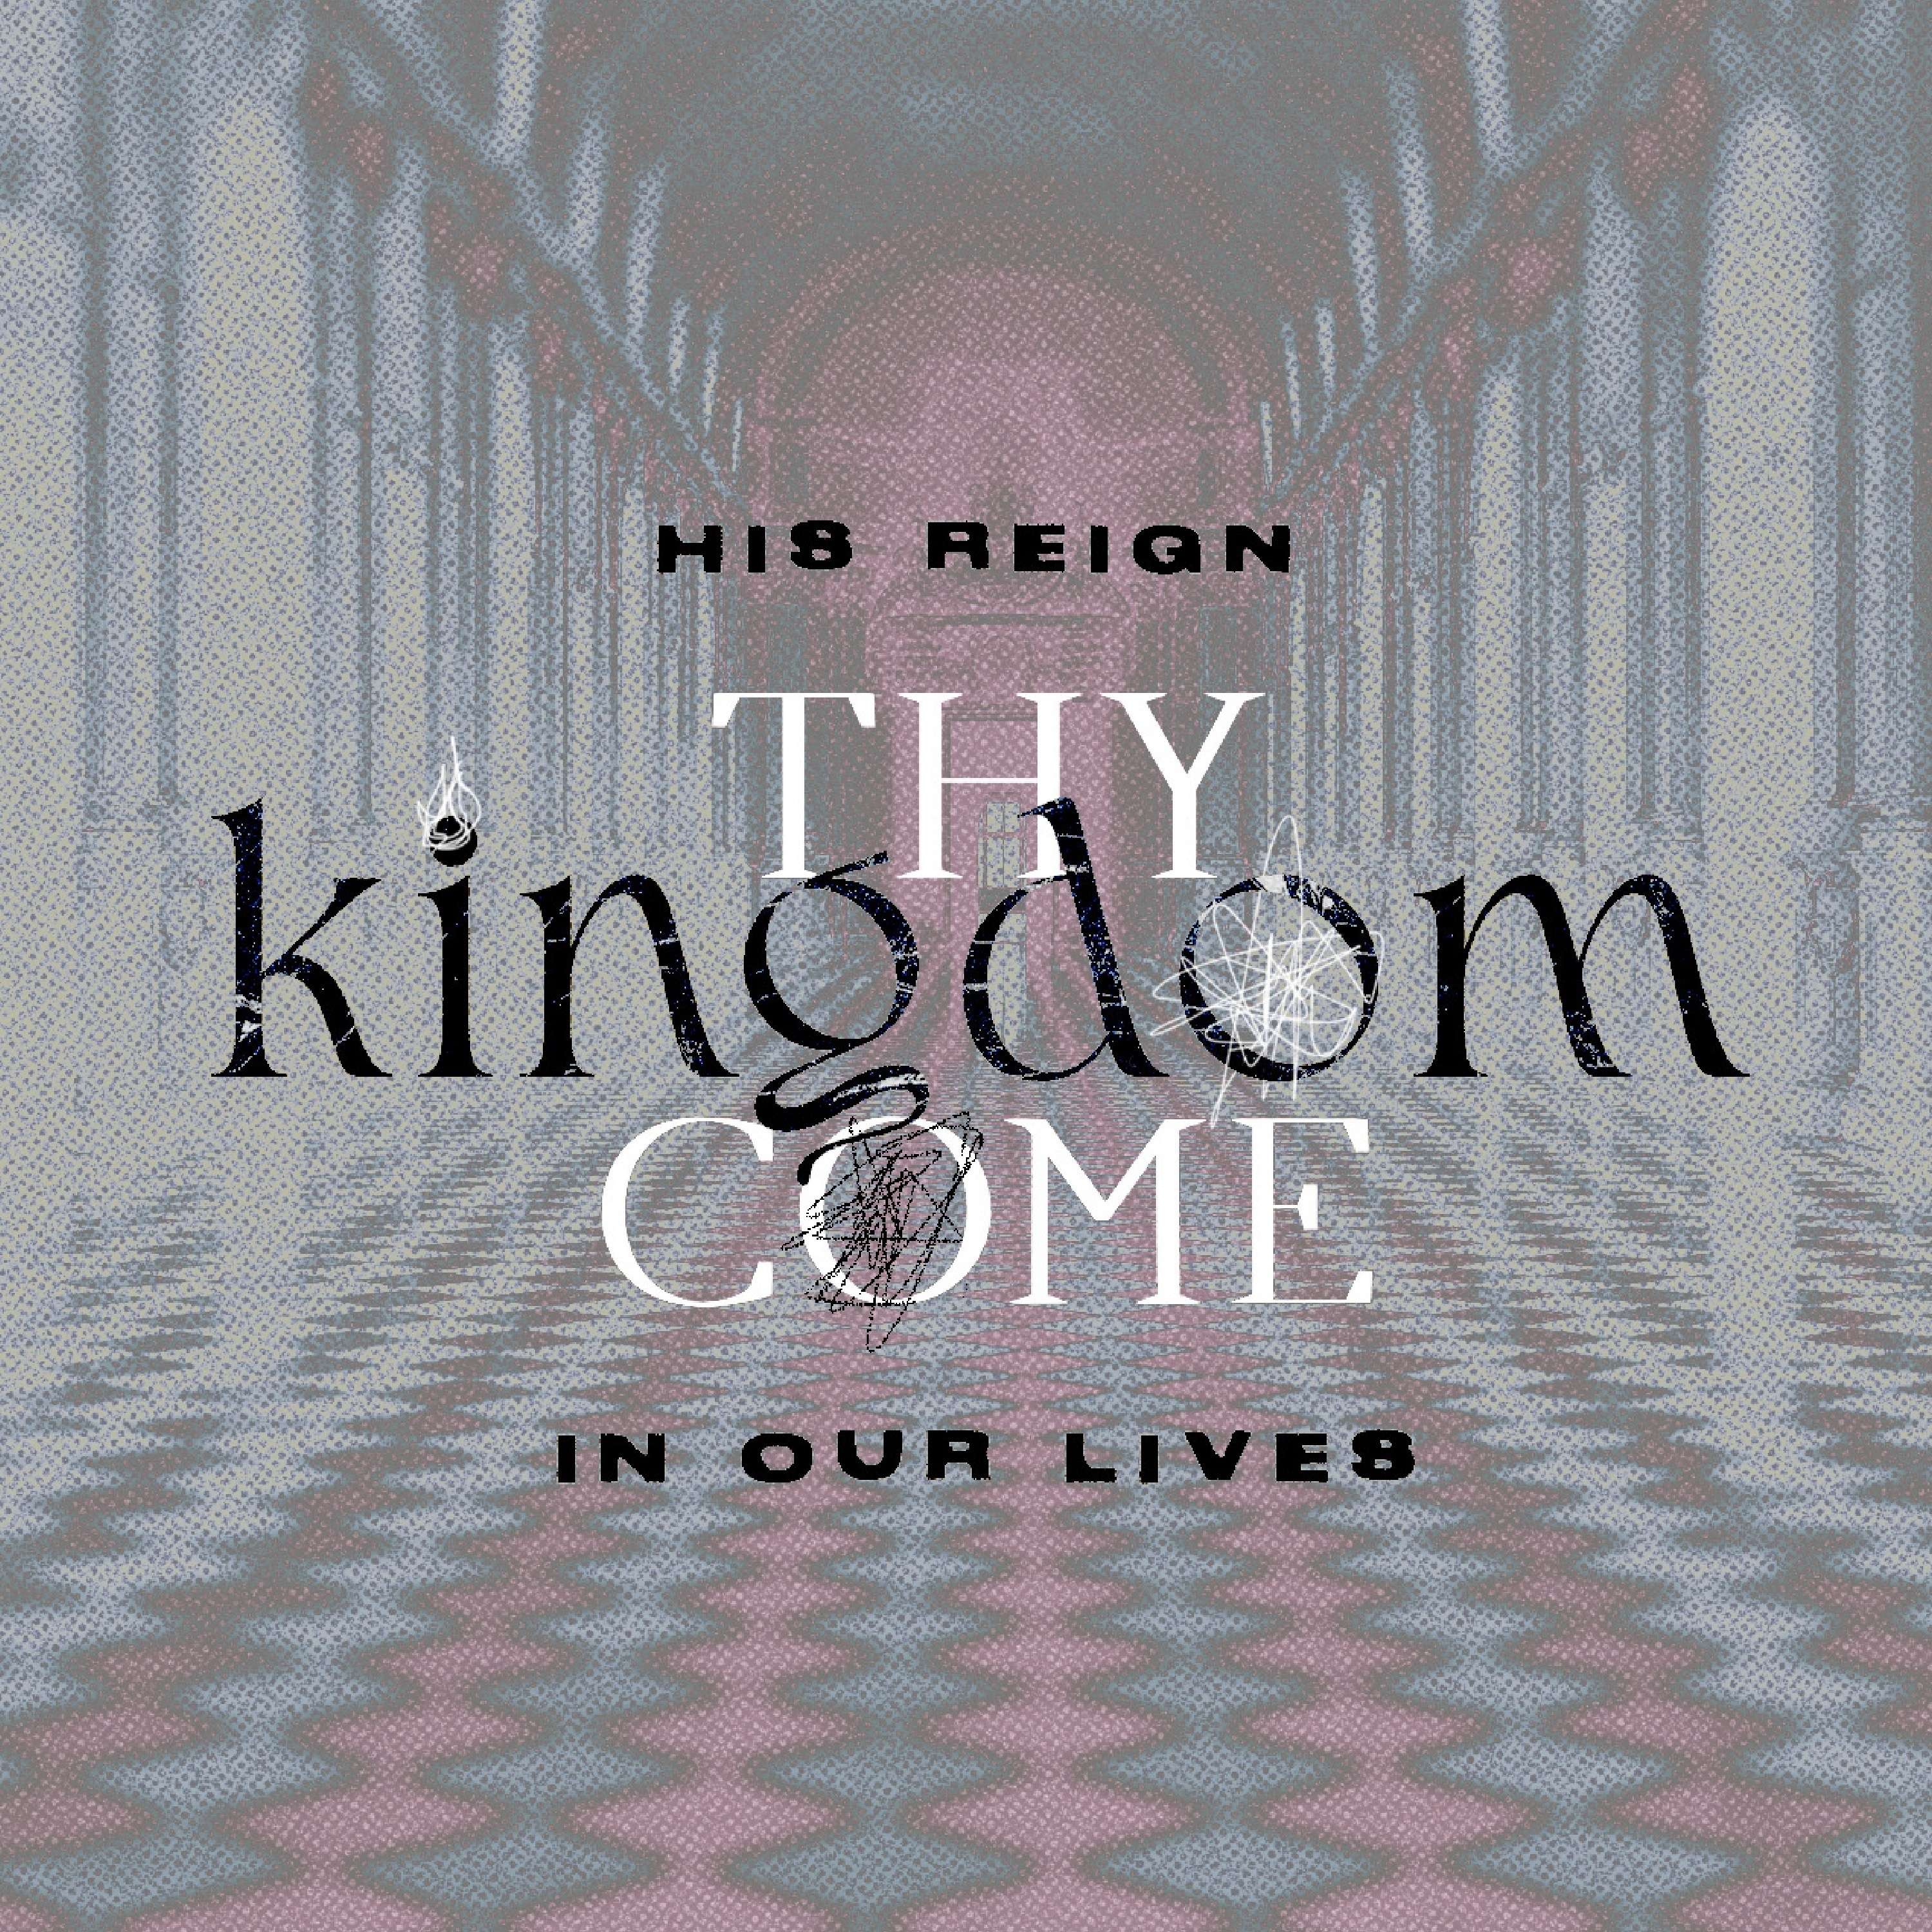 Choose Ye This Day - Thy Kingdom Come: Part 2 - Woodside Bible Church Troy